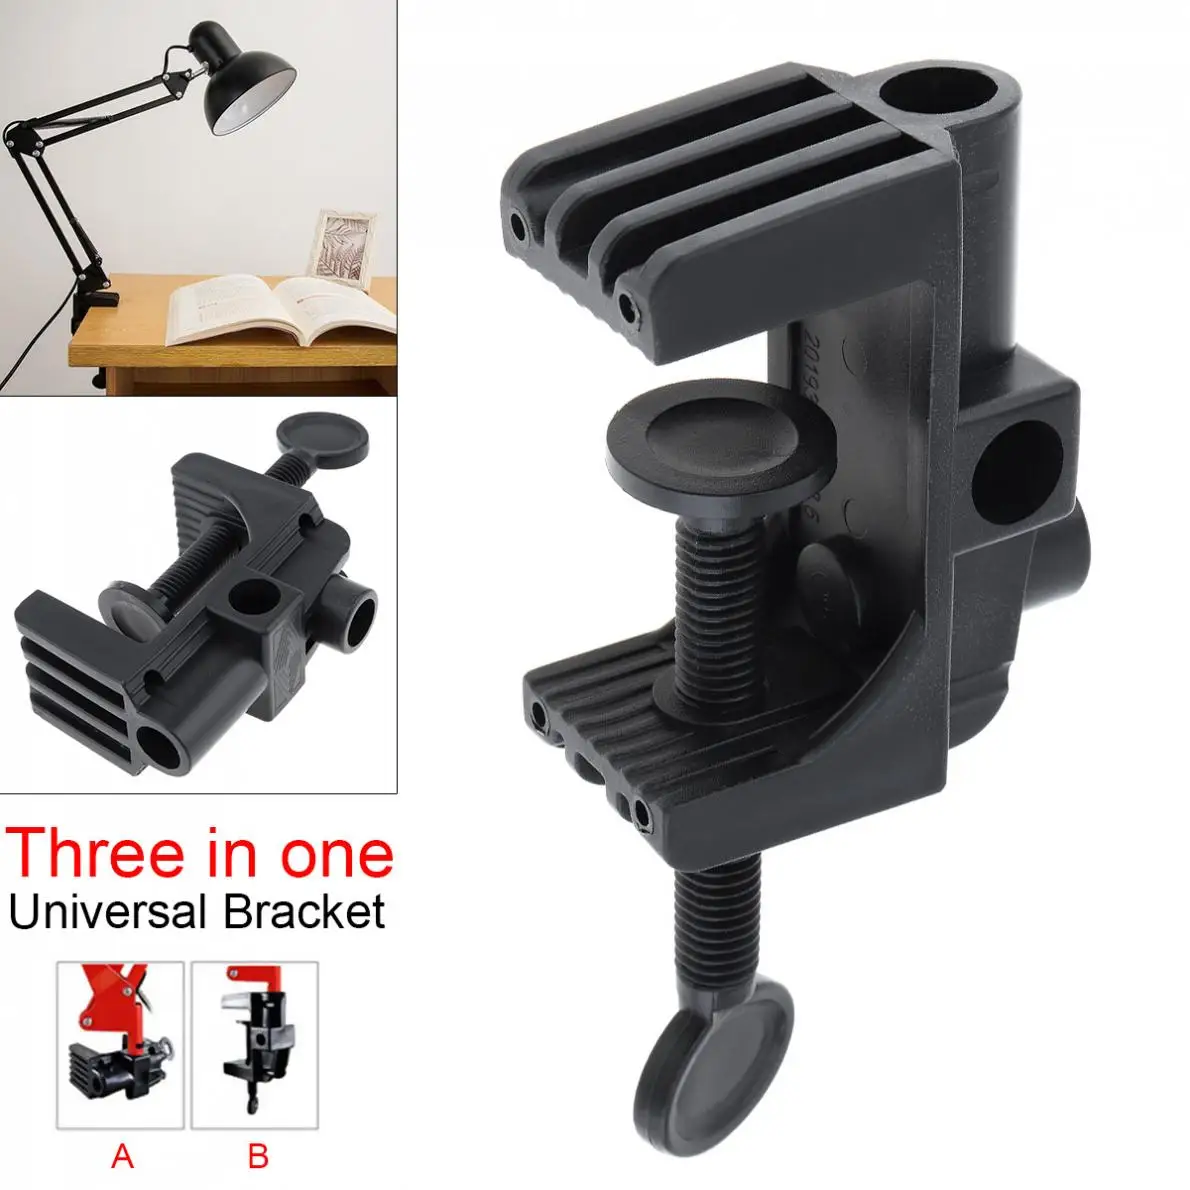 Universal Bracket Clamp Accessories DIY Fixed Metal Clip Fittings Screw Light  Mounting Holder for Microphone Desk Lamp Lamp clip|Light Beads| - AliExpress